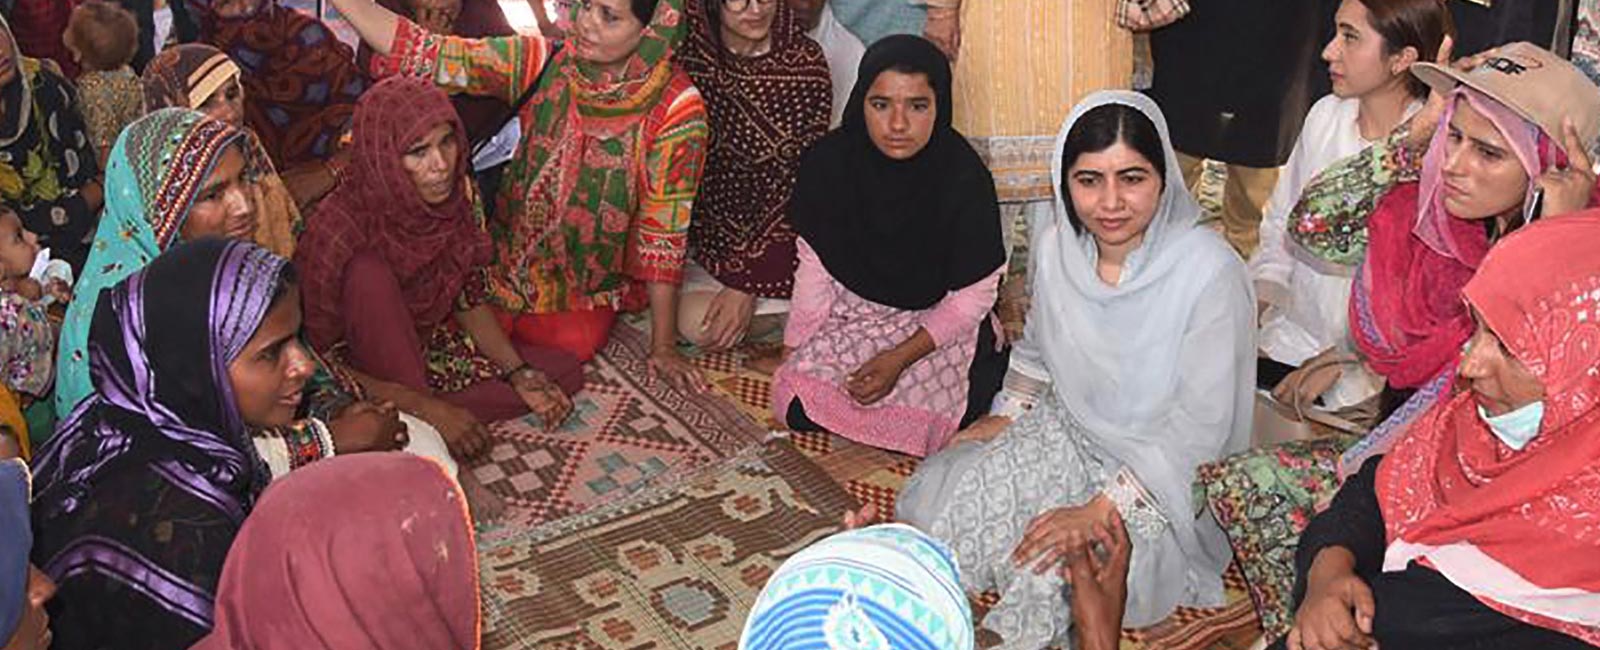 In pictures: Malala visits flood camps in Pakistan